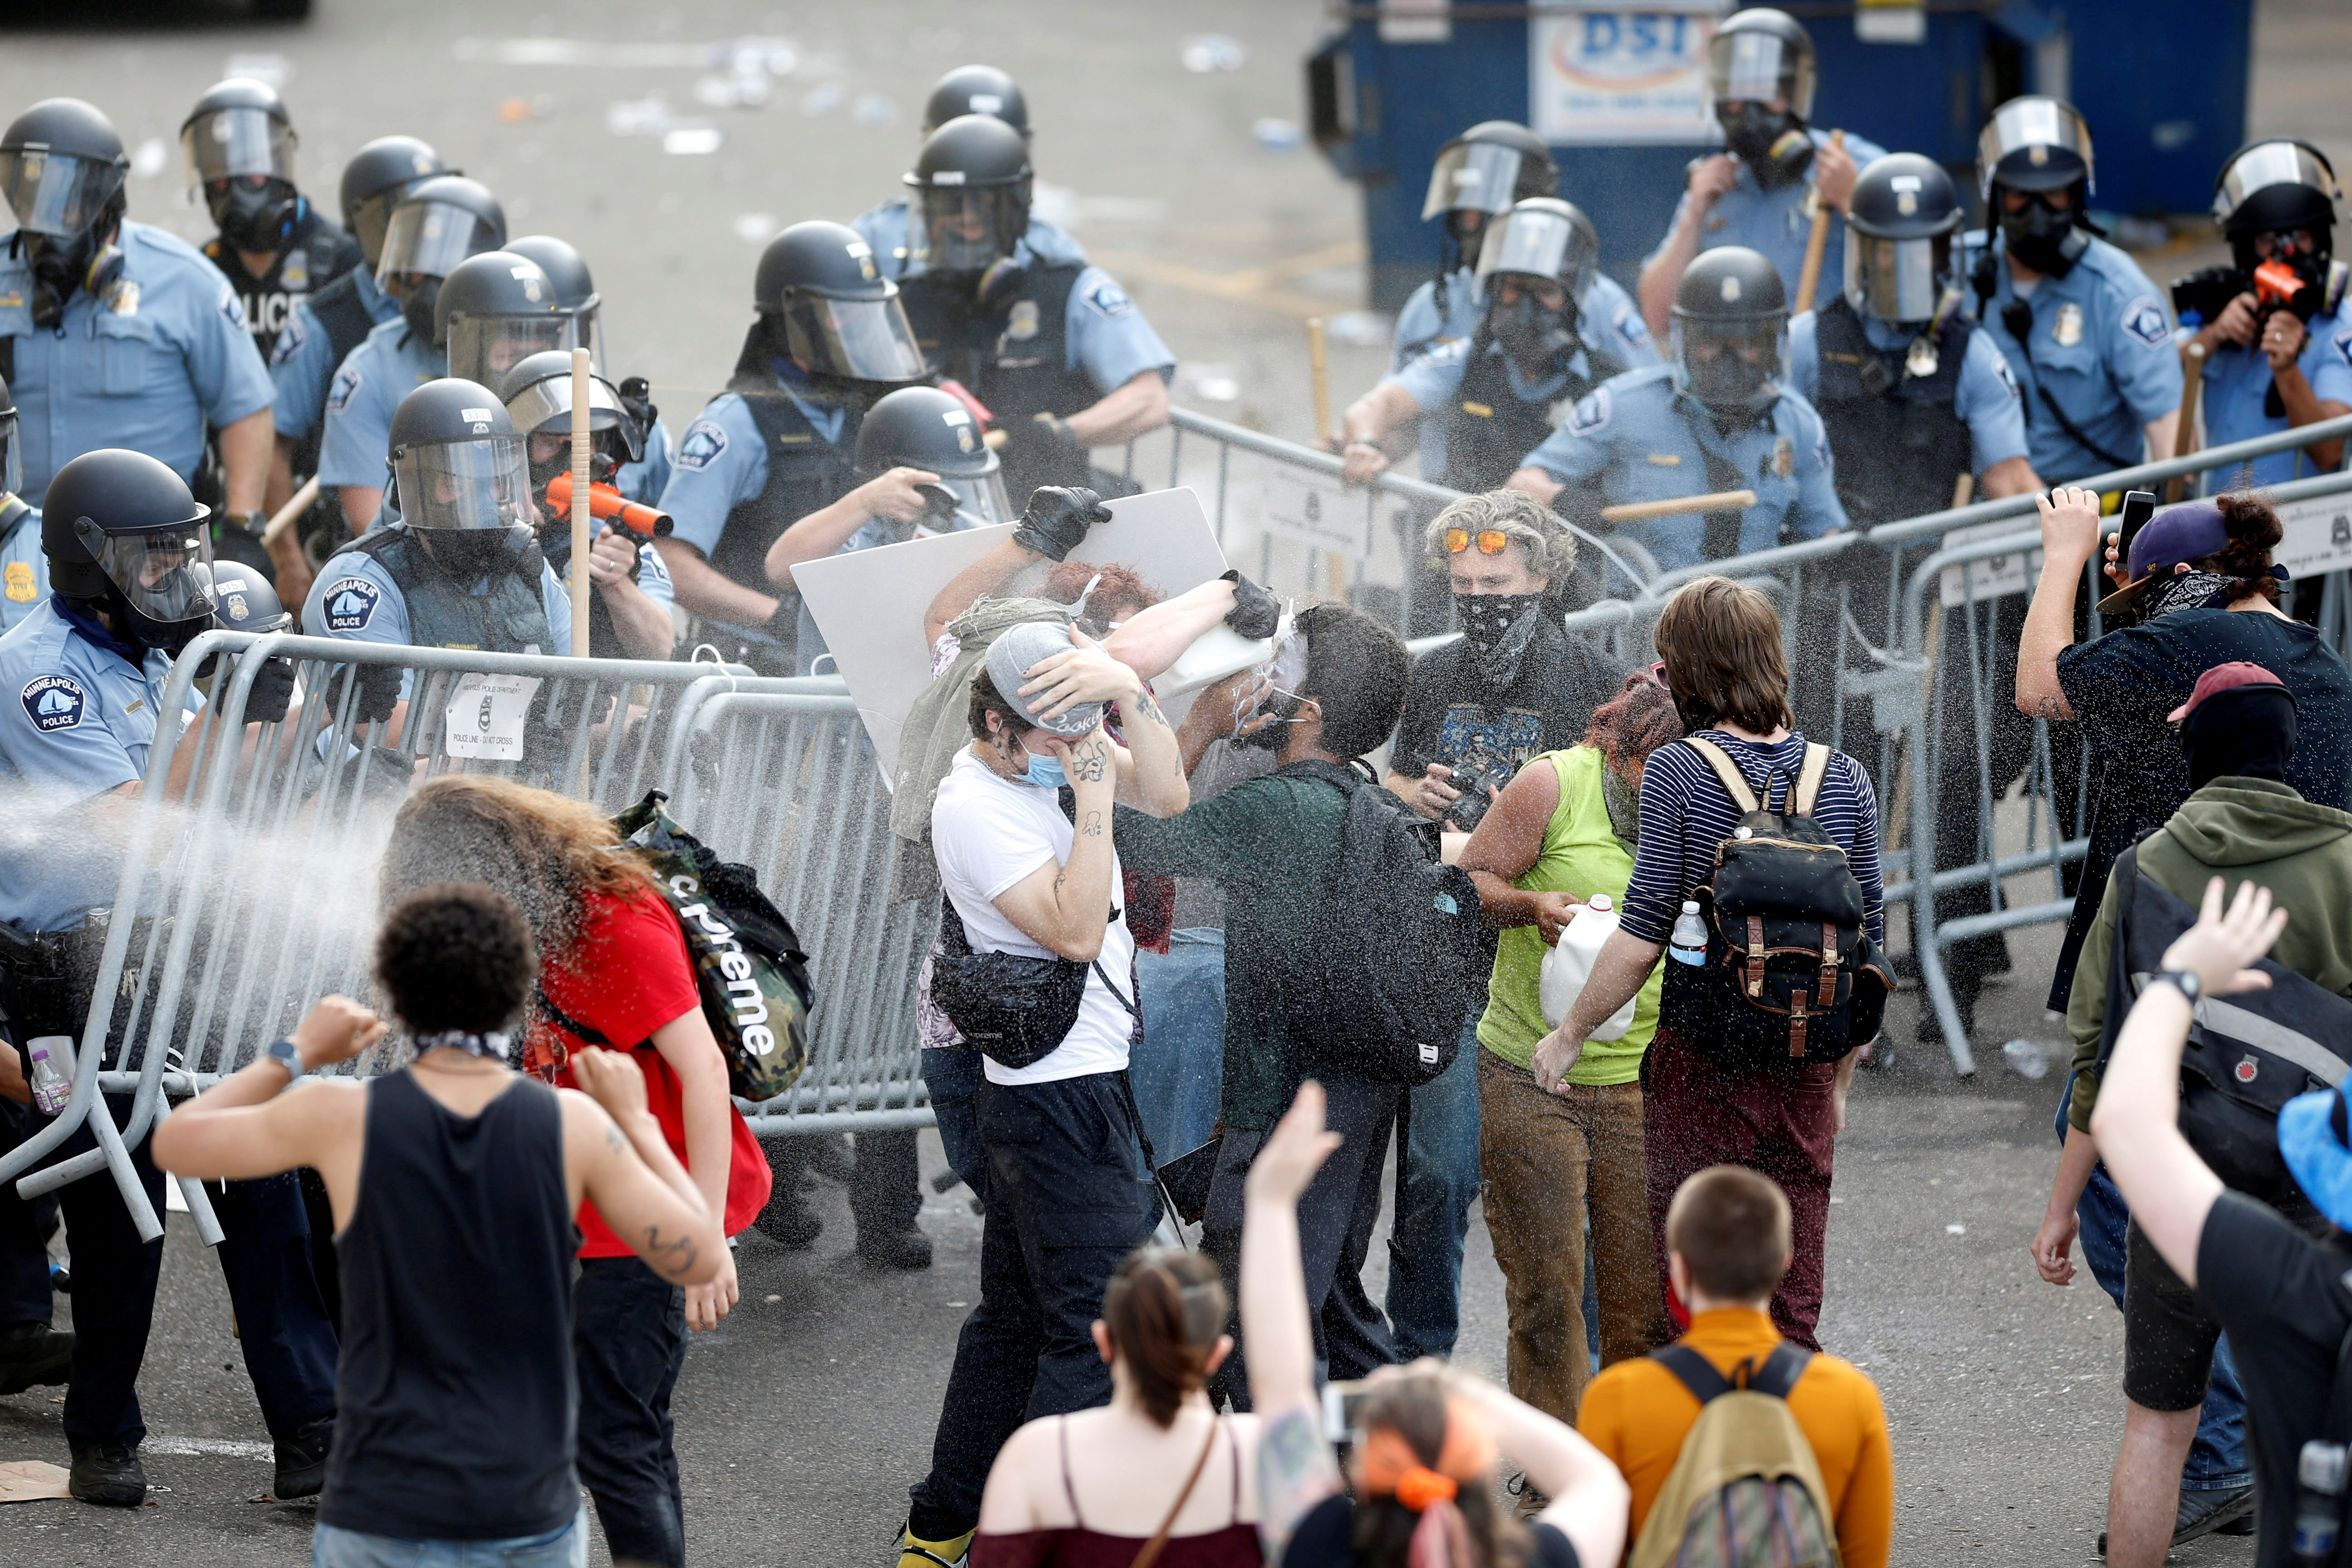 Police spray mace at protestors to break up a gathering near the Minneapolis Police third precinct after a white police officer was caught on a bystander's video pressing his knee into the neck of African-American man George Floyd, who later died at a hospital, in Minneapolis, Minnesota, US, on May 27, 2020. Photo: Reuters